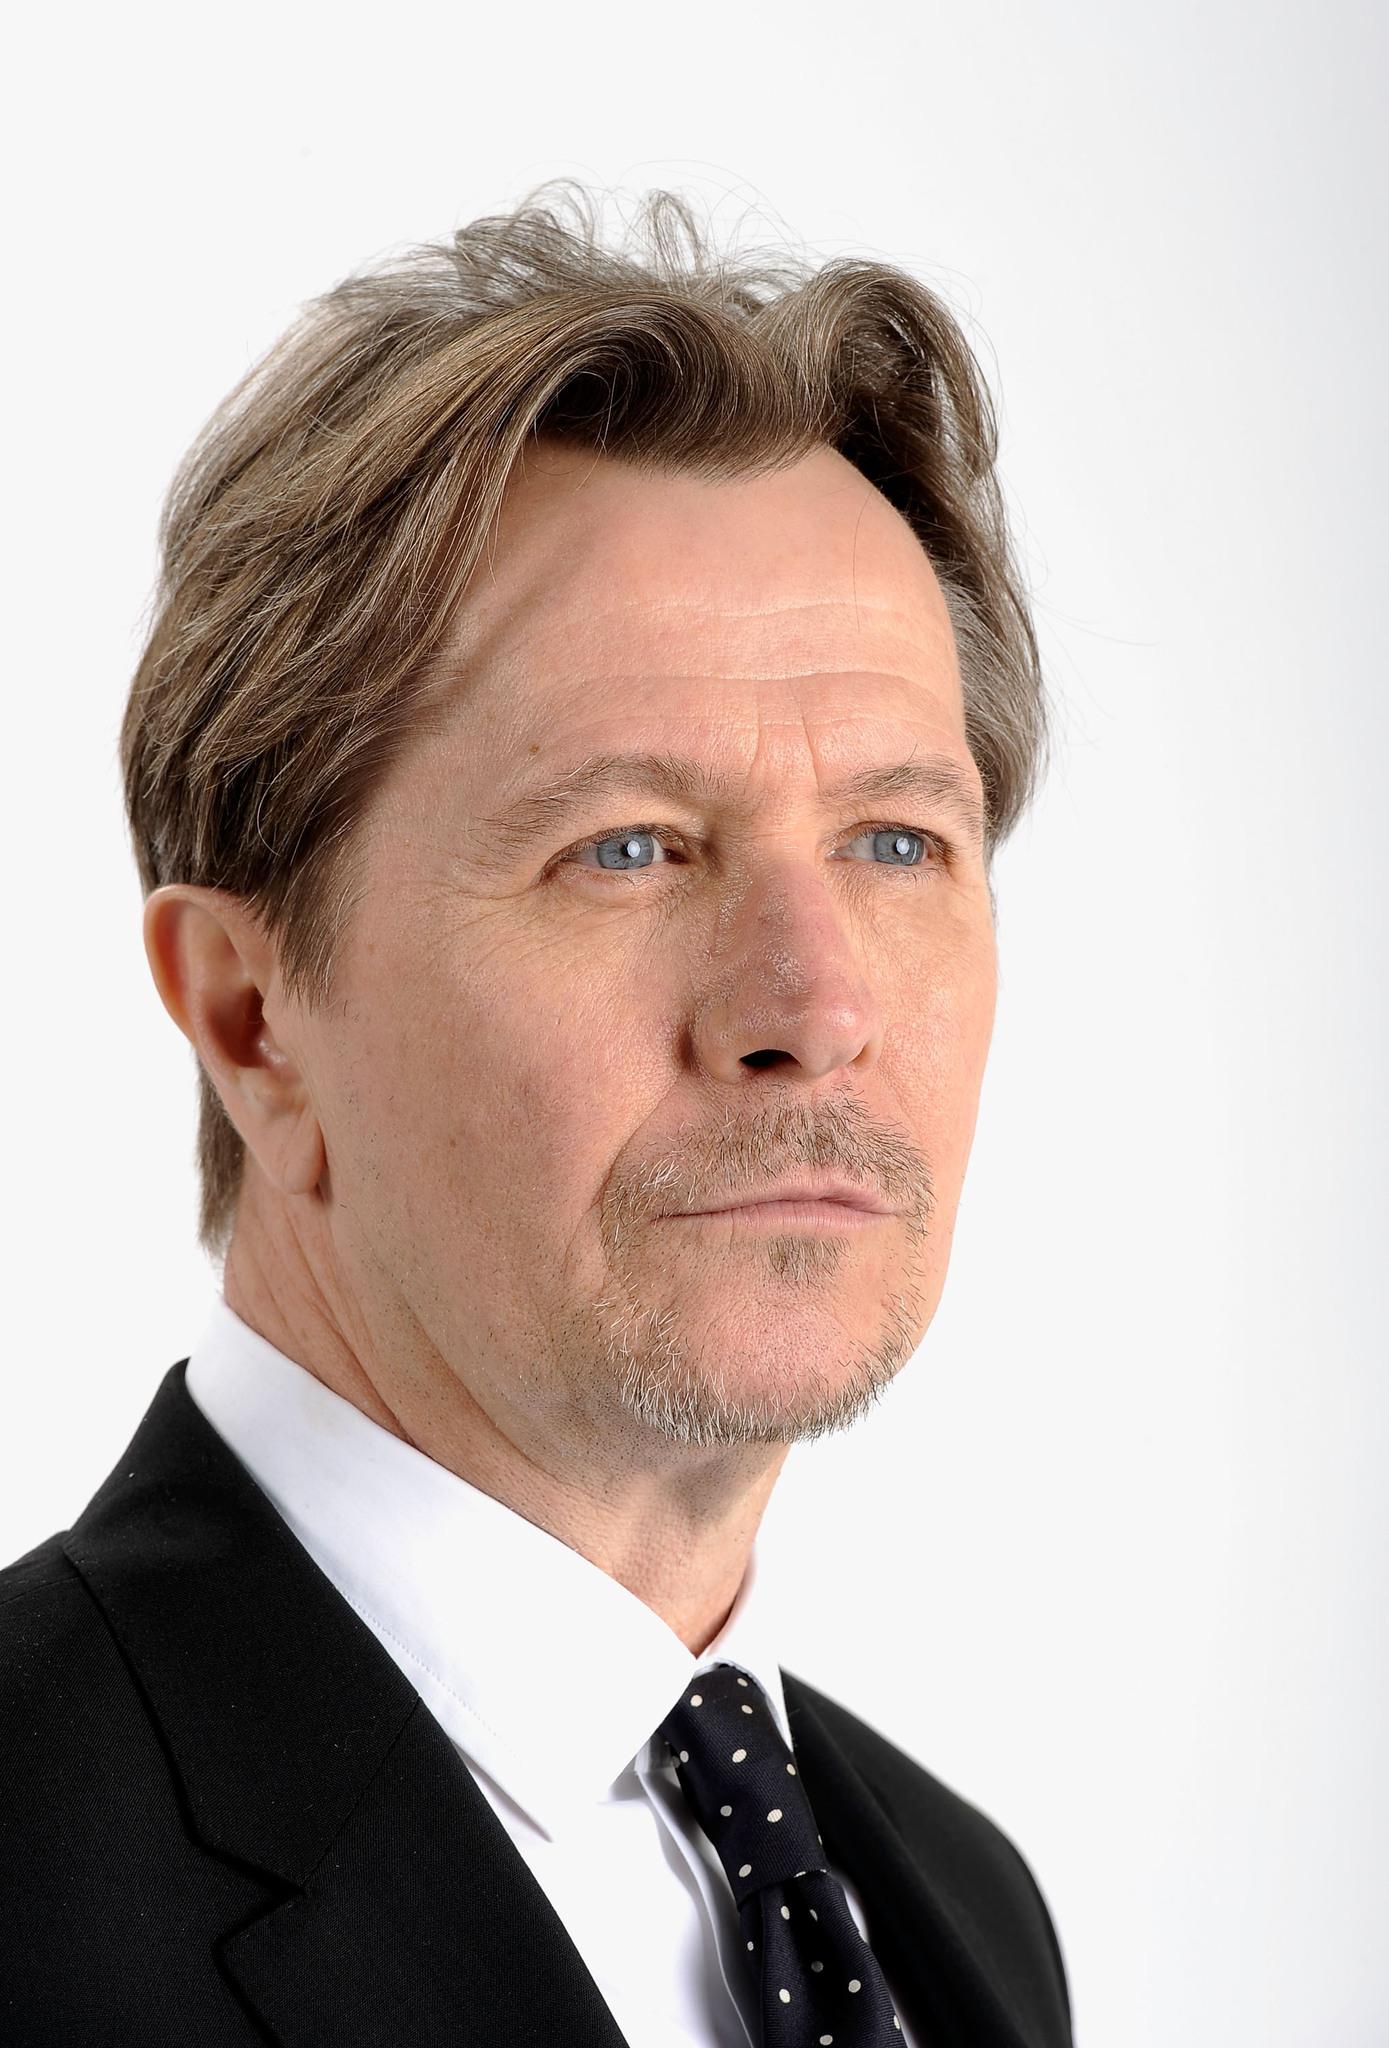 Happy birthday to Gary Oldman. A wonderful actor one of my favourites!!! Thats it. Thank you for reading my message 